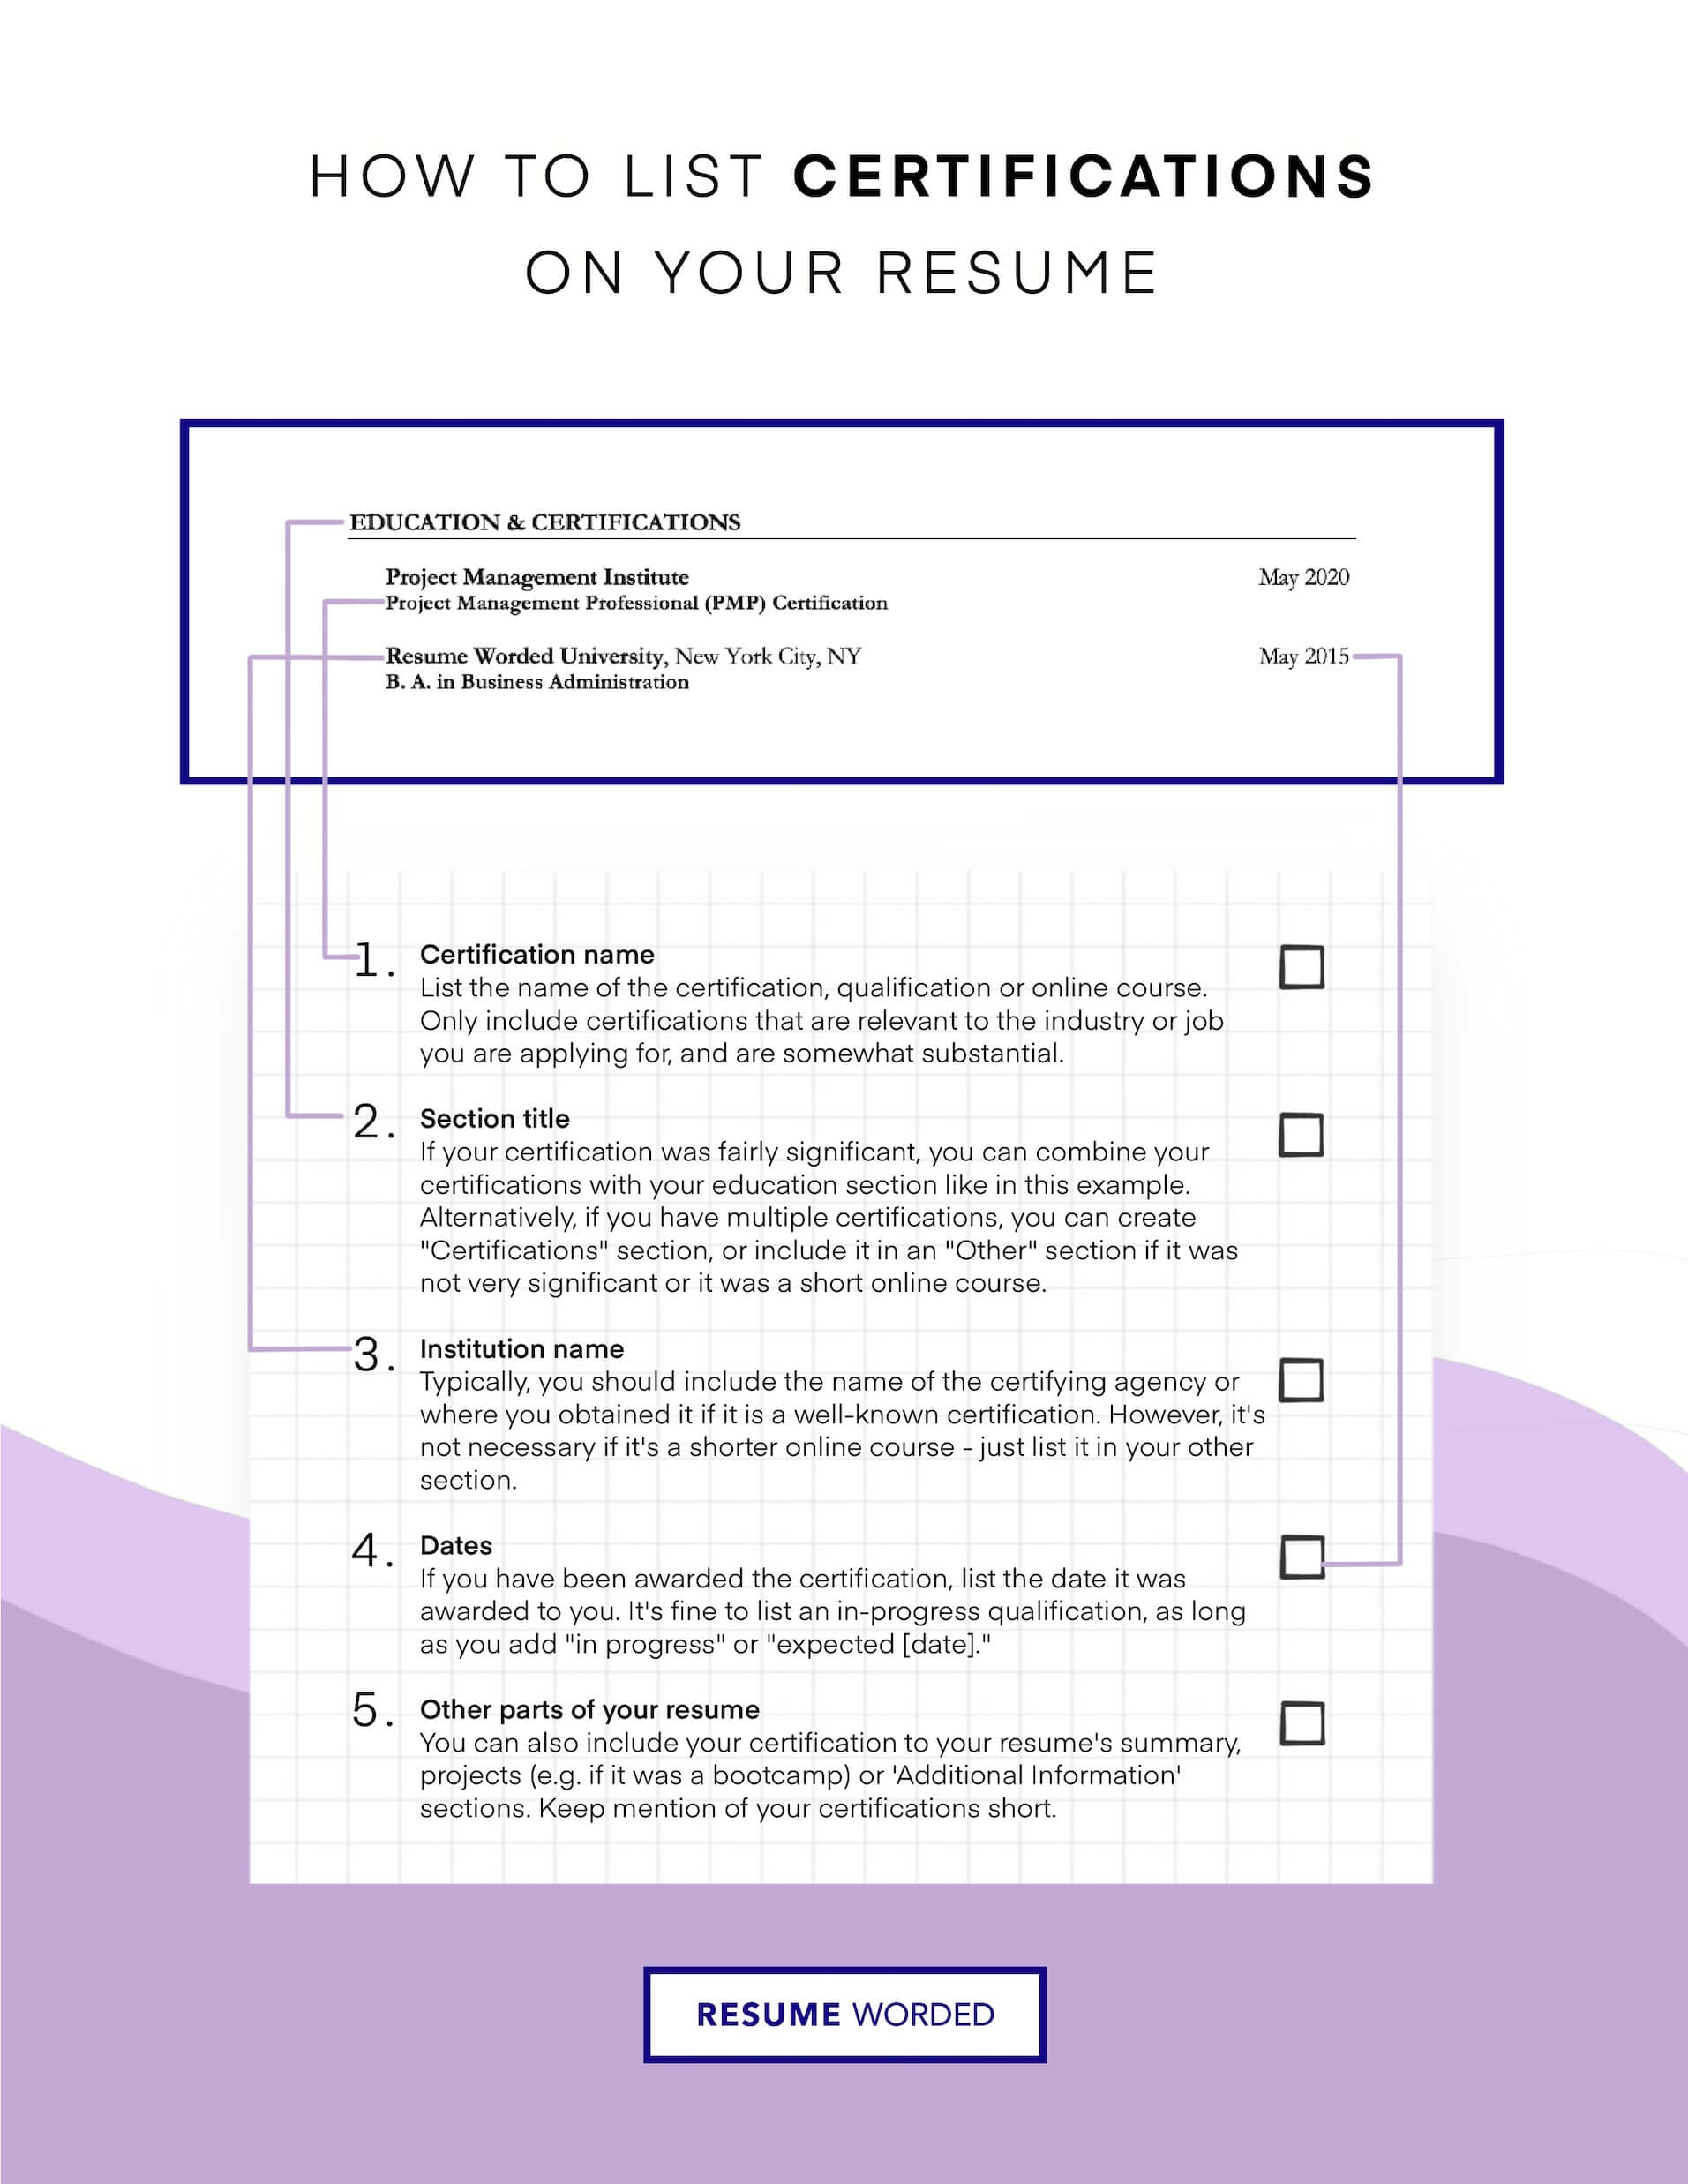 Showcase specific skills and certifications - Clinical Research Assistant Resume